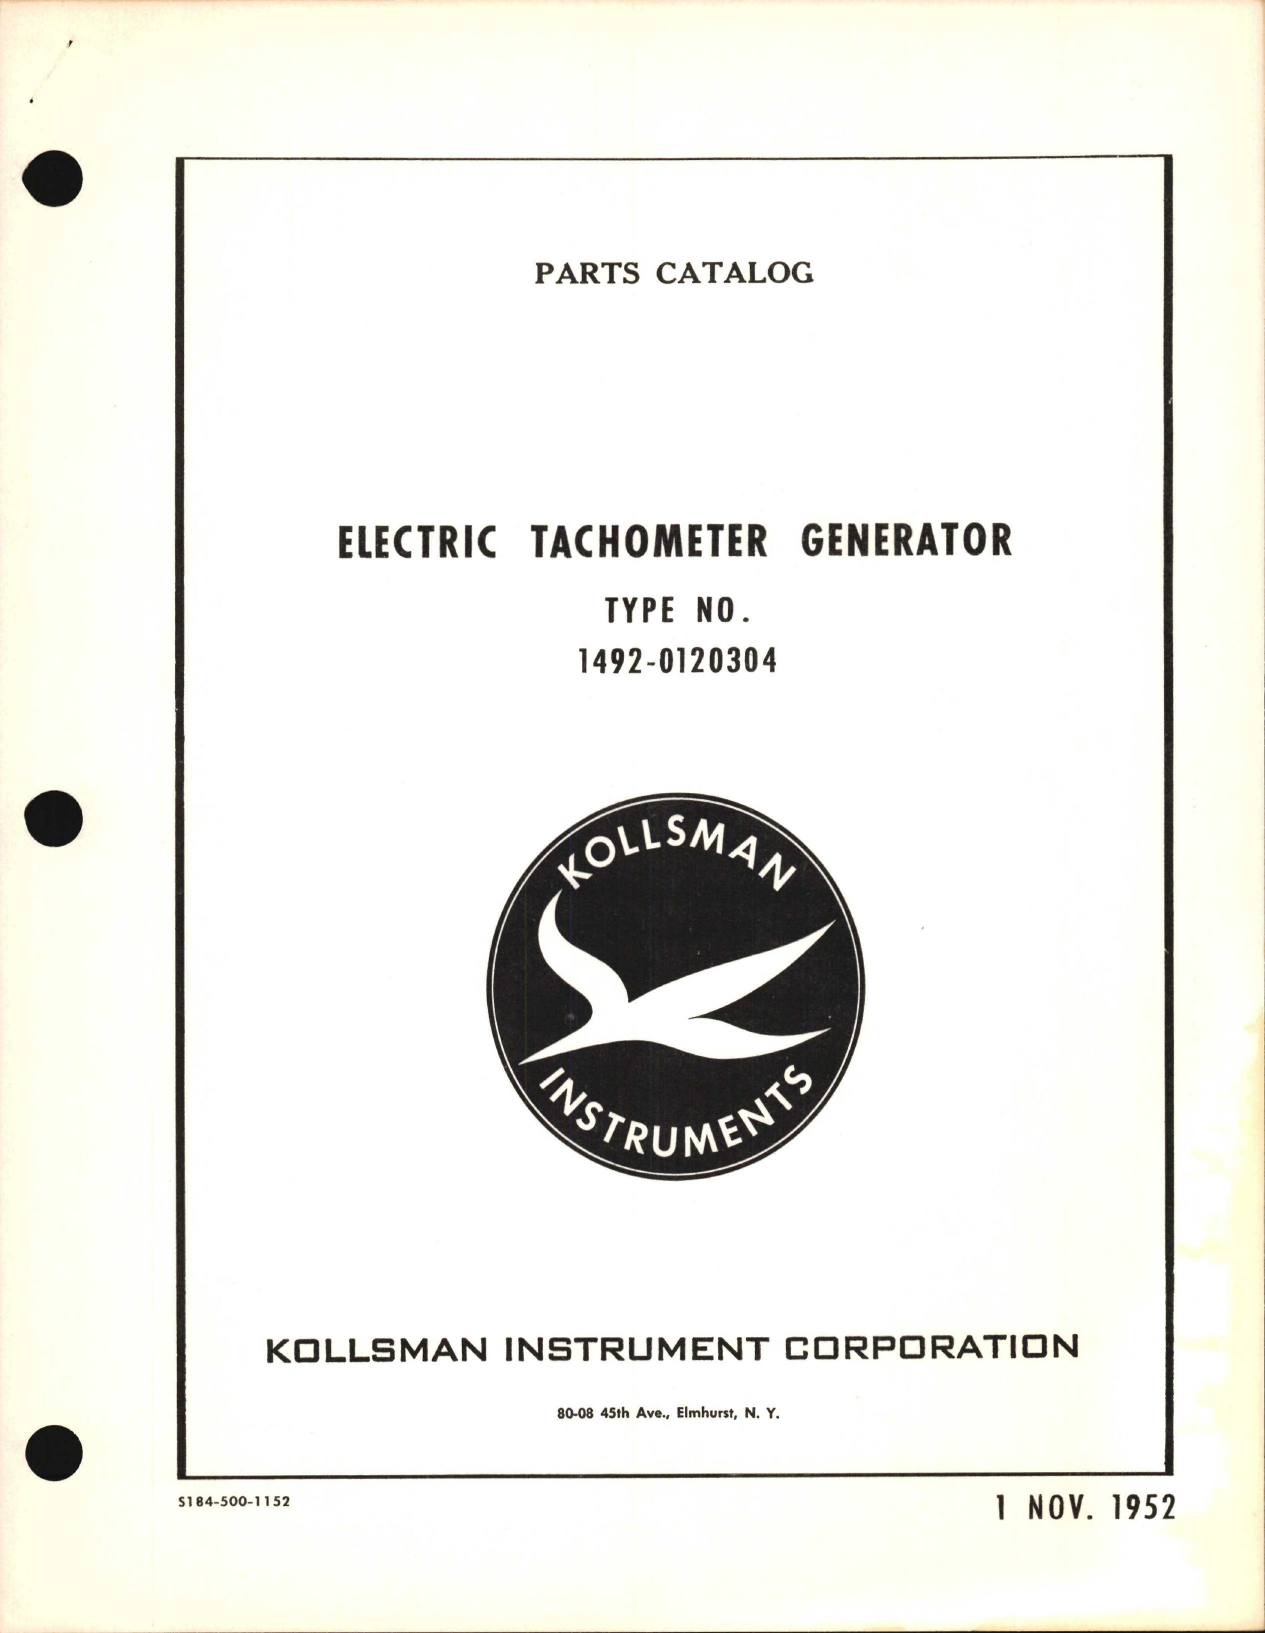 Sample page 1 from AirCorps Library document: Parts Catalog for Kollsman Electric Tachometer Generator